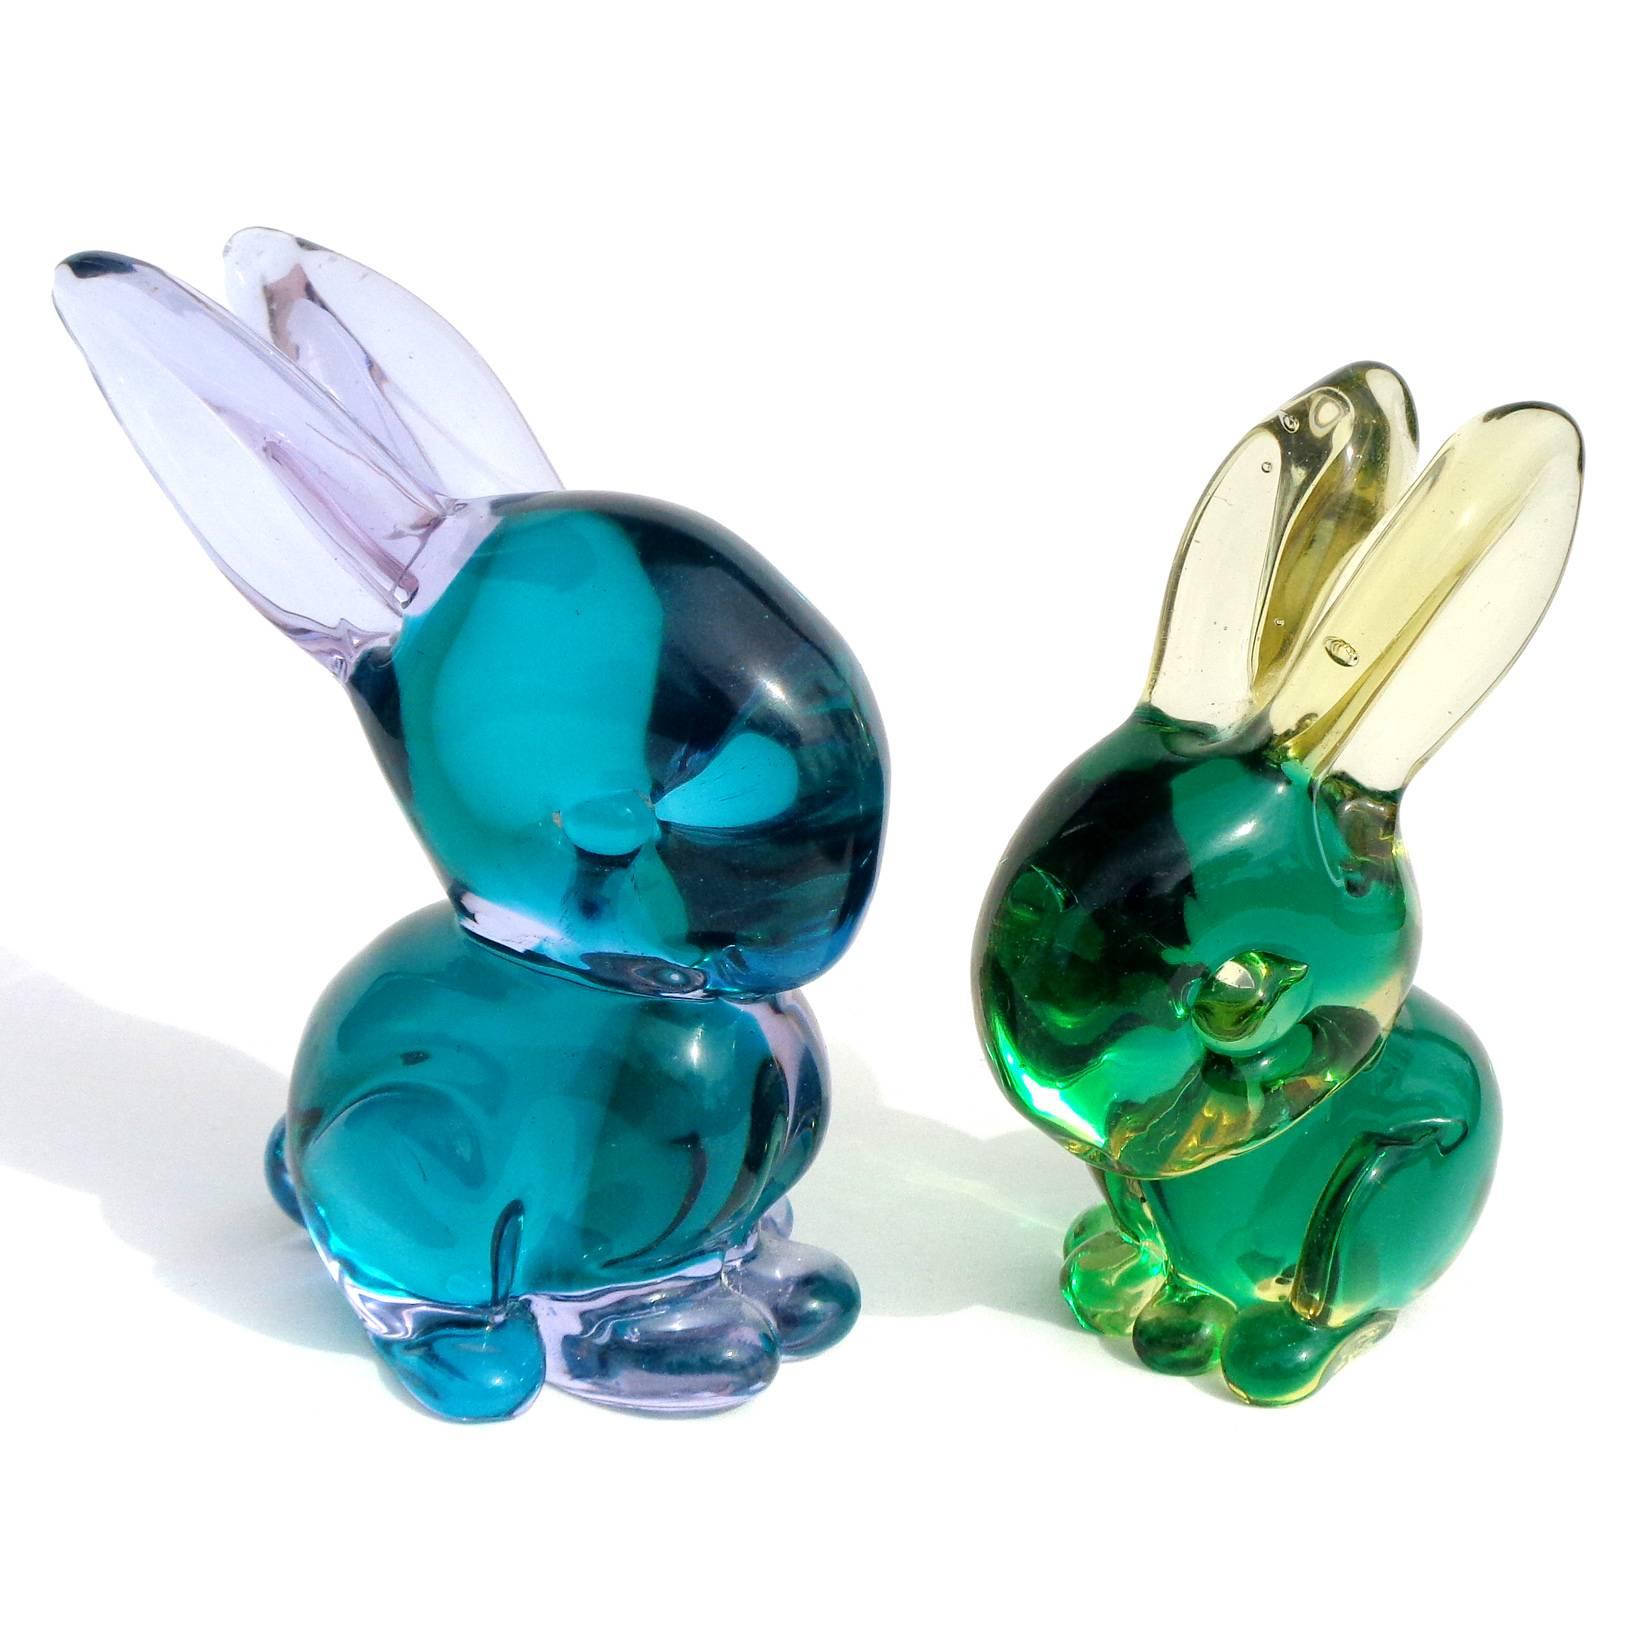 Free shipping worldwide! See details below description.

Adorable set of Murano handblown Sommerso blue Alexandrite over green, and yellow over green art glass bunny rabbit sculptures. Documented to designer Flavio Poli for the Seguso Vetri d'Arte